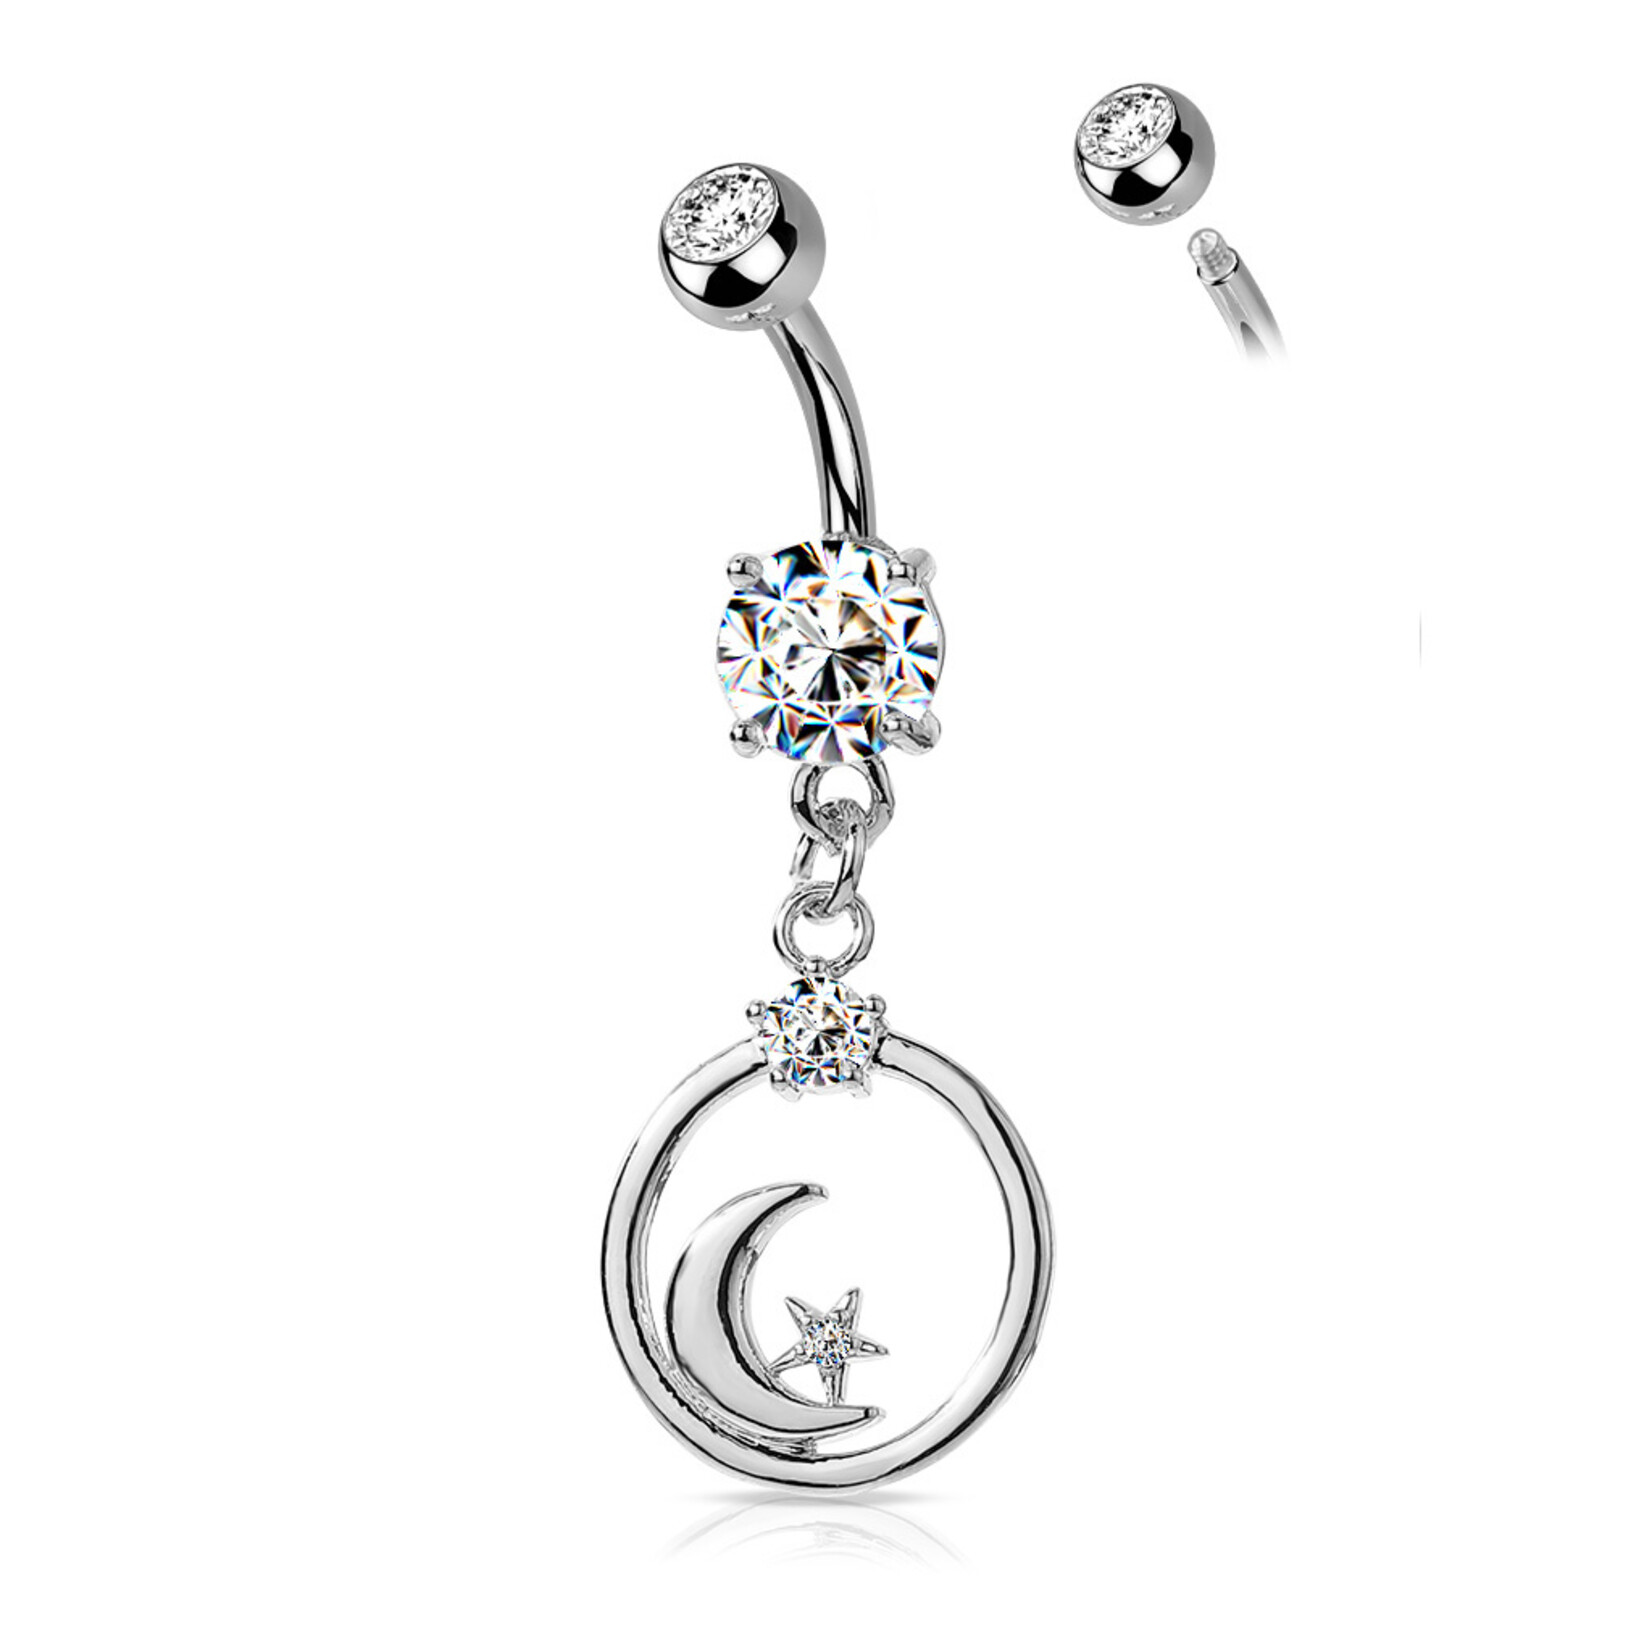 Hollywood Body Jewelry Moon & Star Bent Barbell Navel Dangle